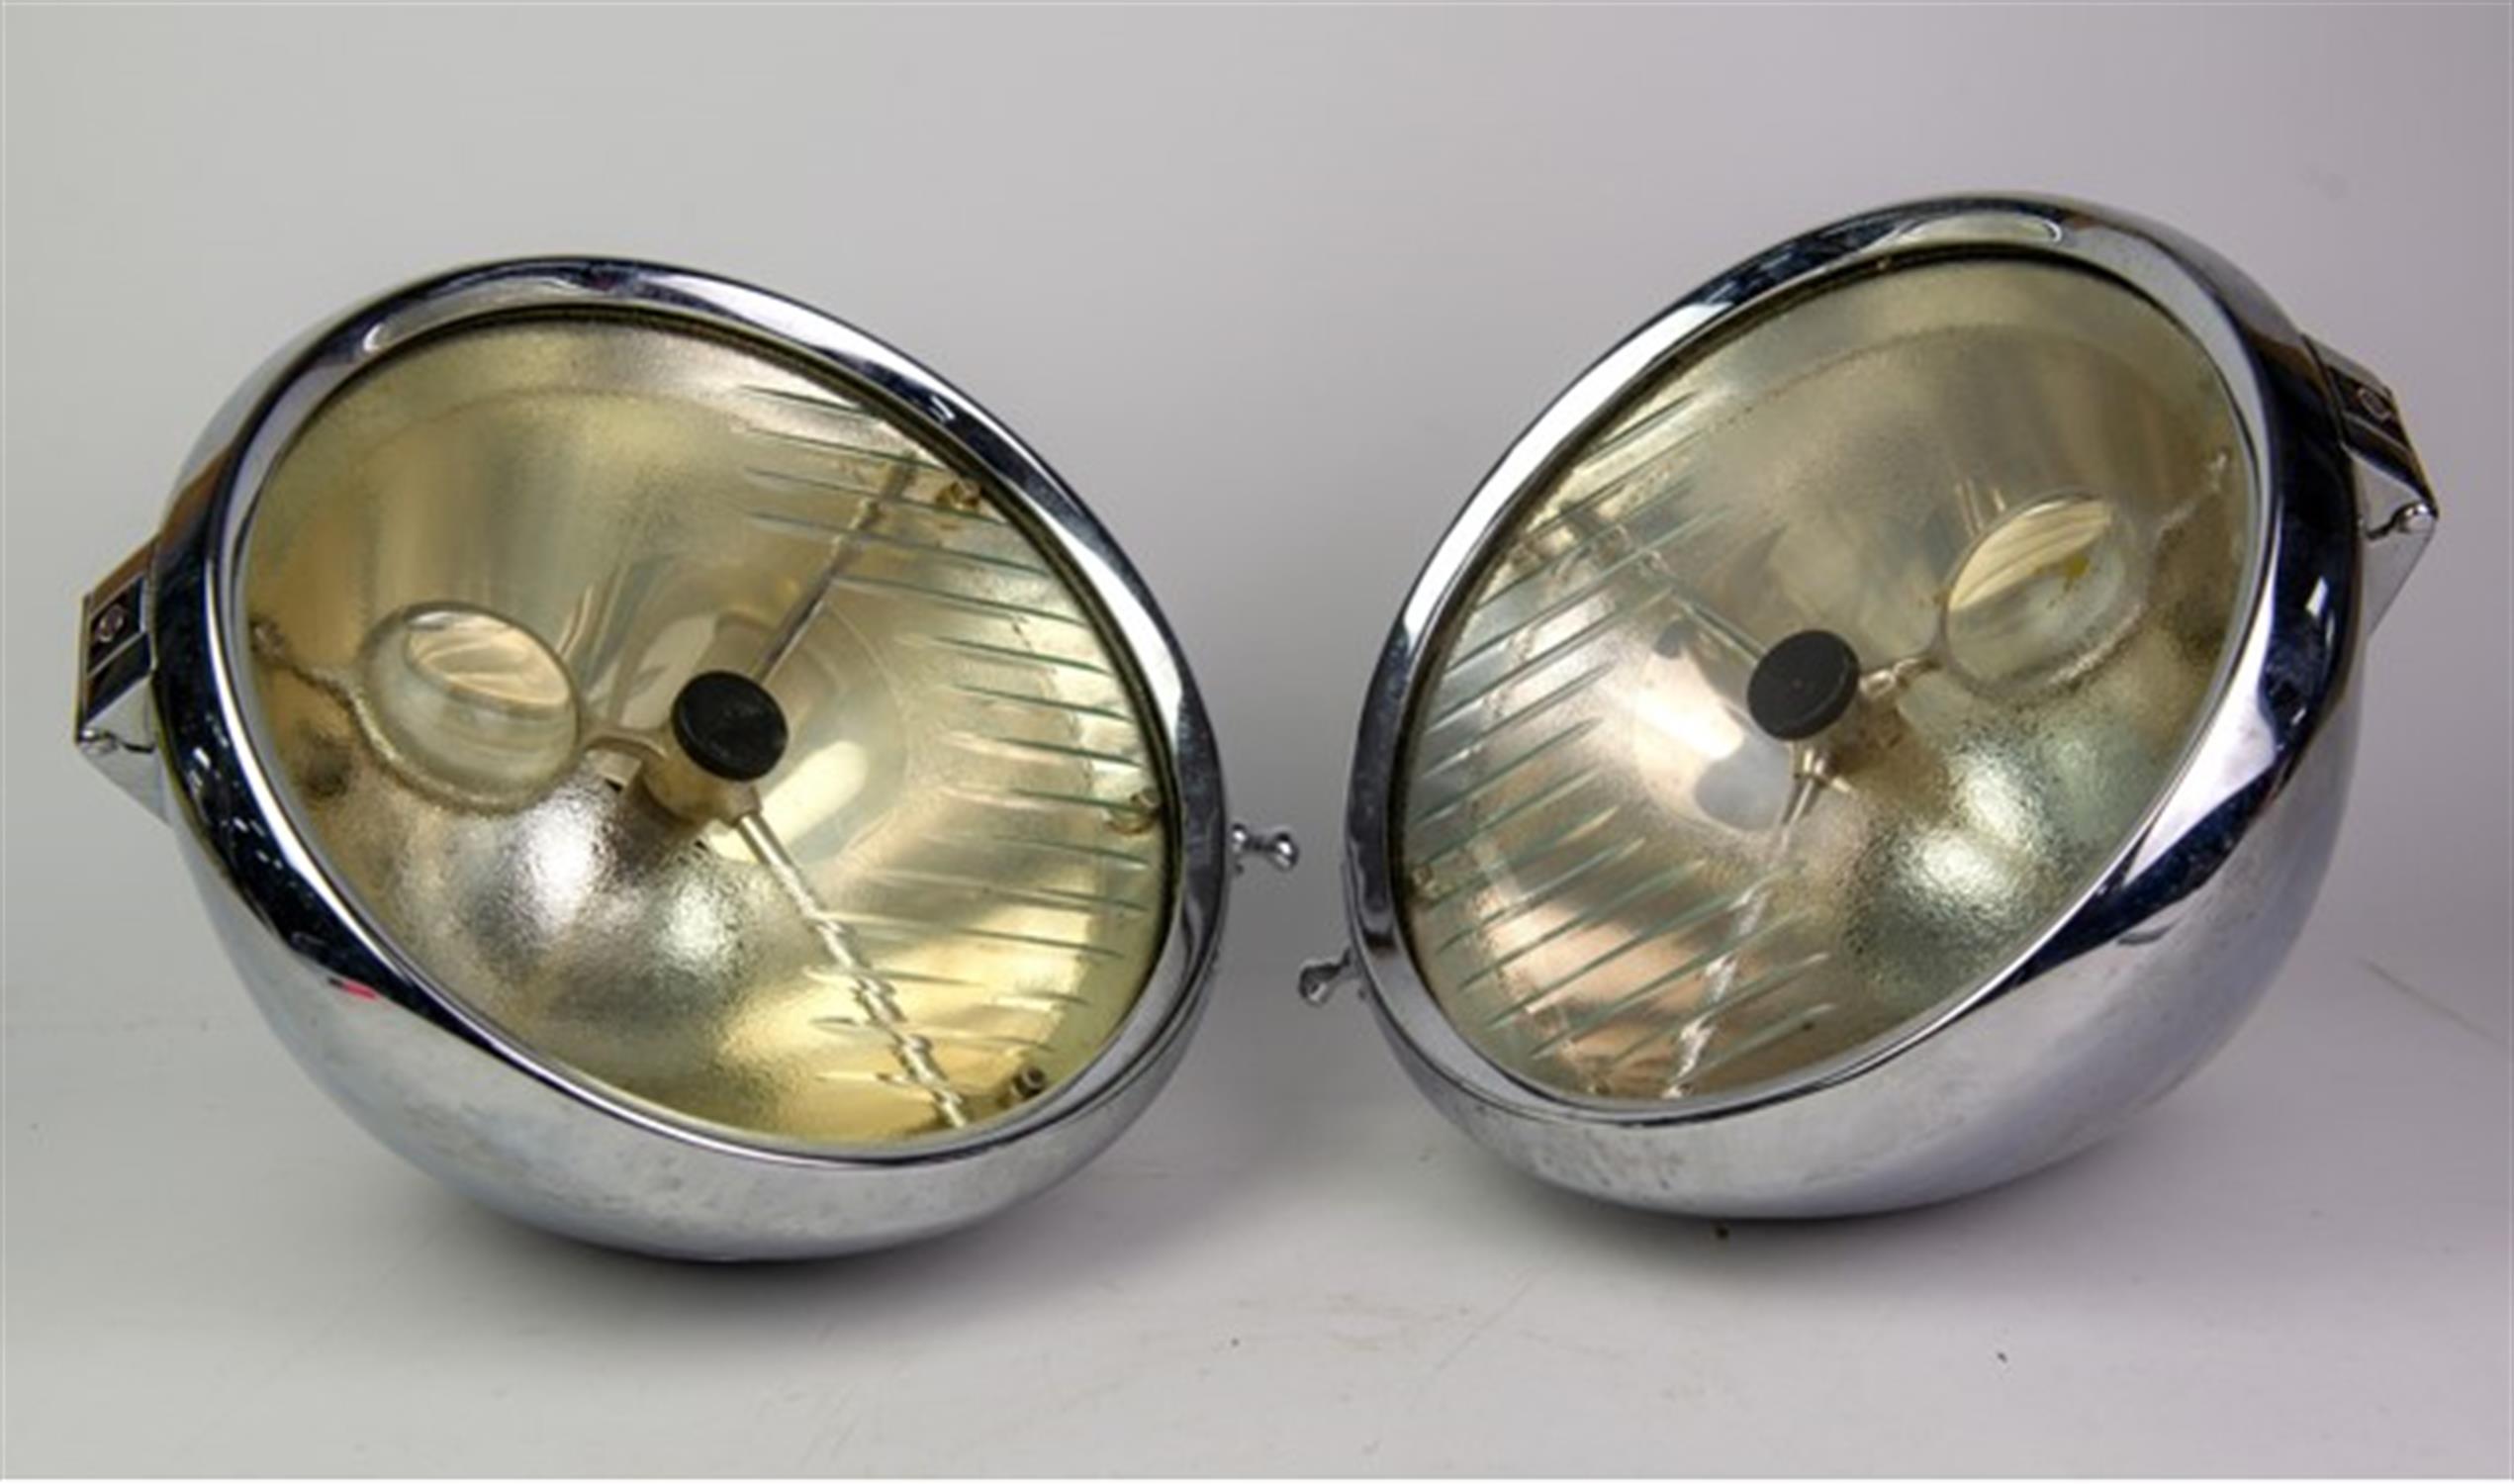 Lucas P100 headlamps - A pair of large car lights with bullseye lenses and chrome shells (2).